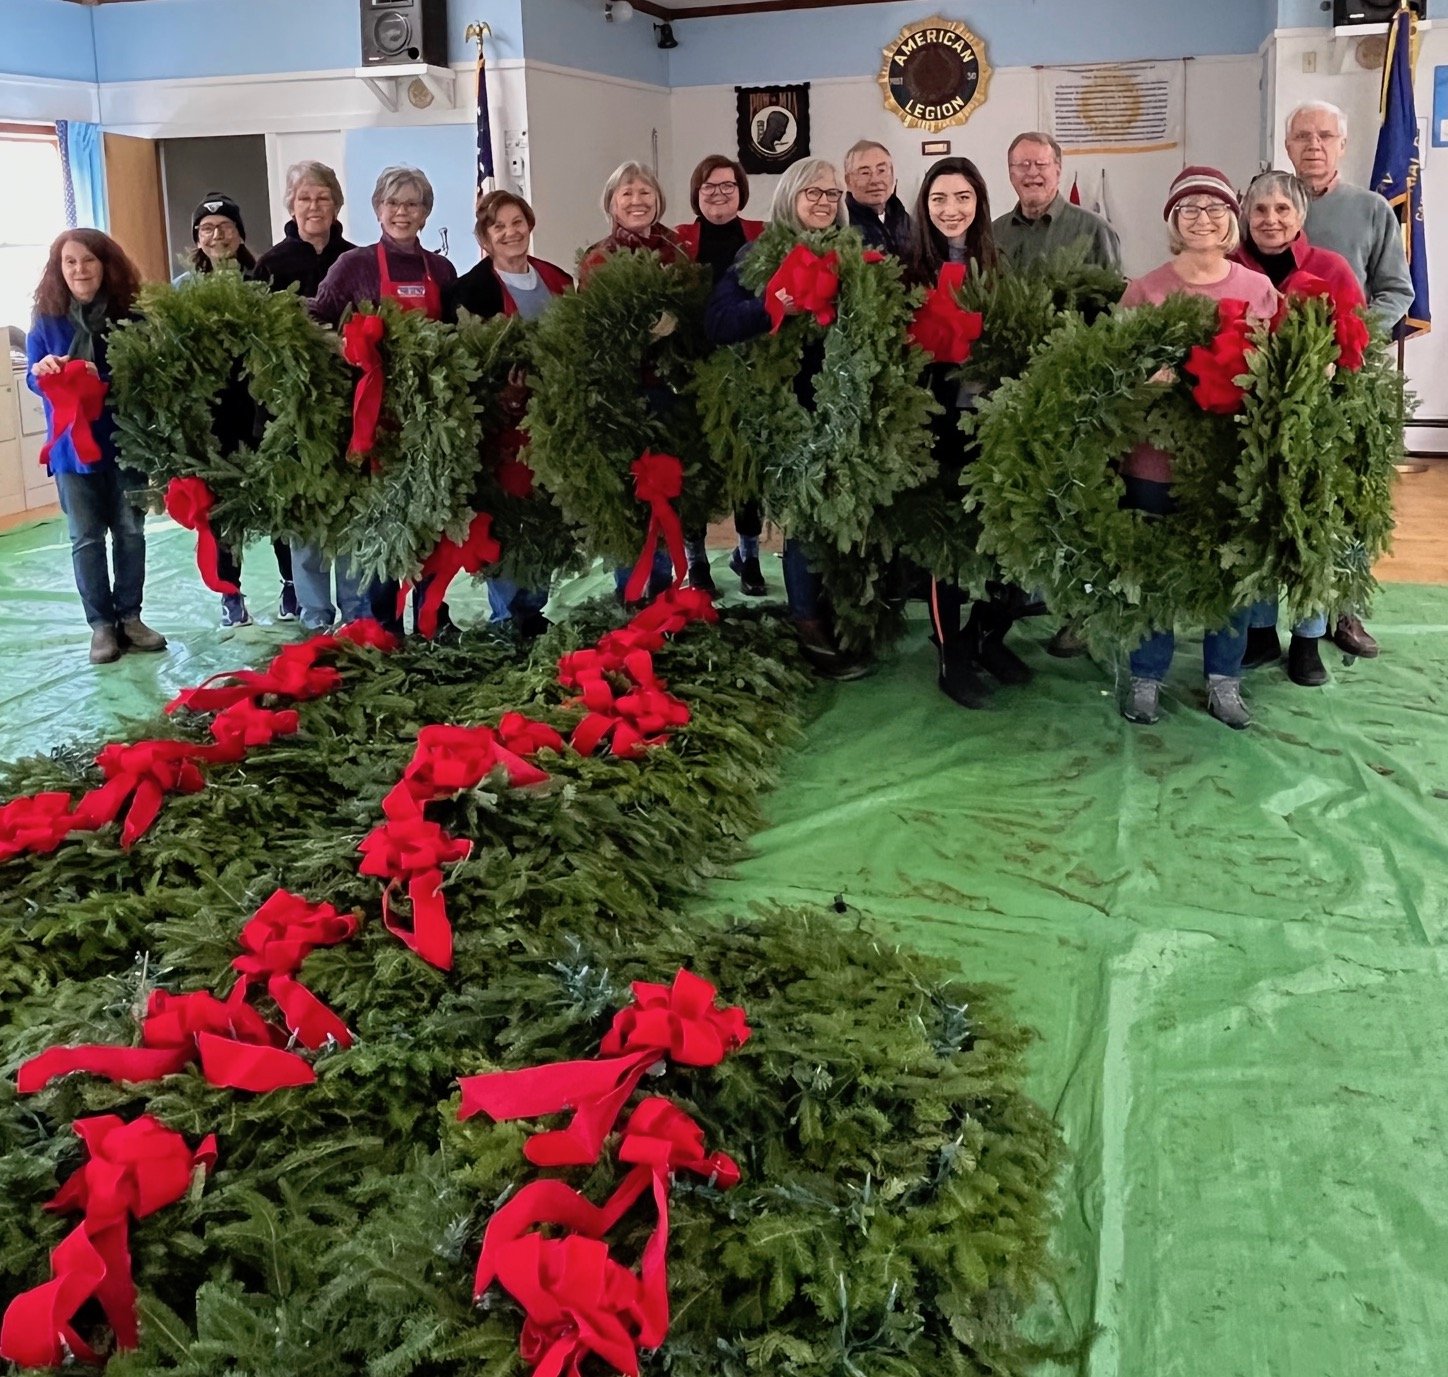 98 fresh balsam wreaths are completed with handmade crimson felt bows and strings of warm white lights for hanging downtown by Camden Garden Club members.